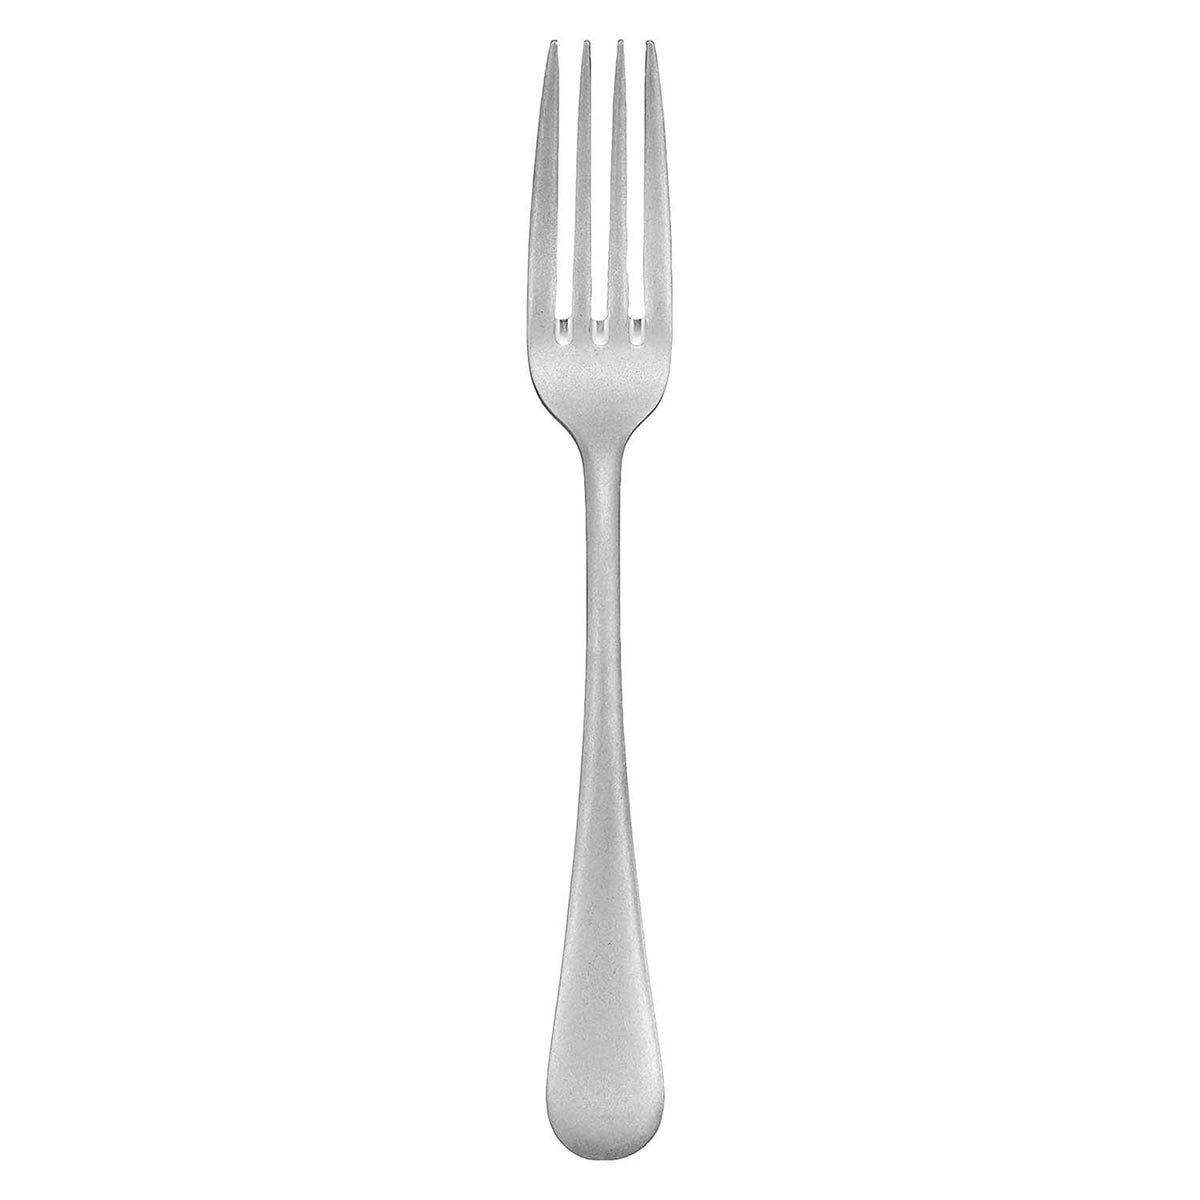 AOYOSHI VINTAGE Old English Stainless Steel Dinner Fork